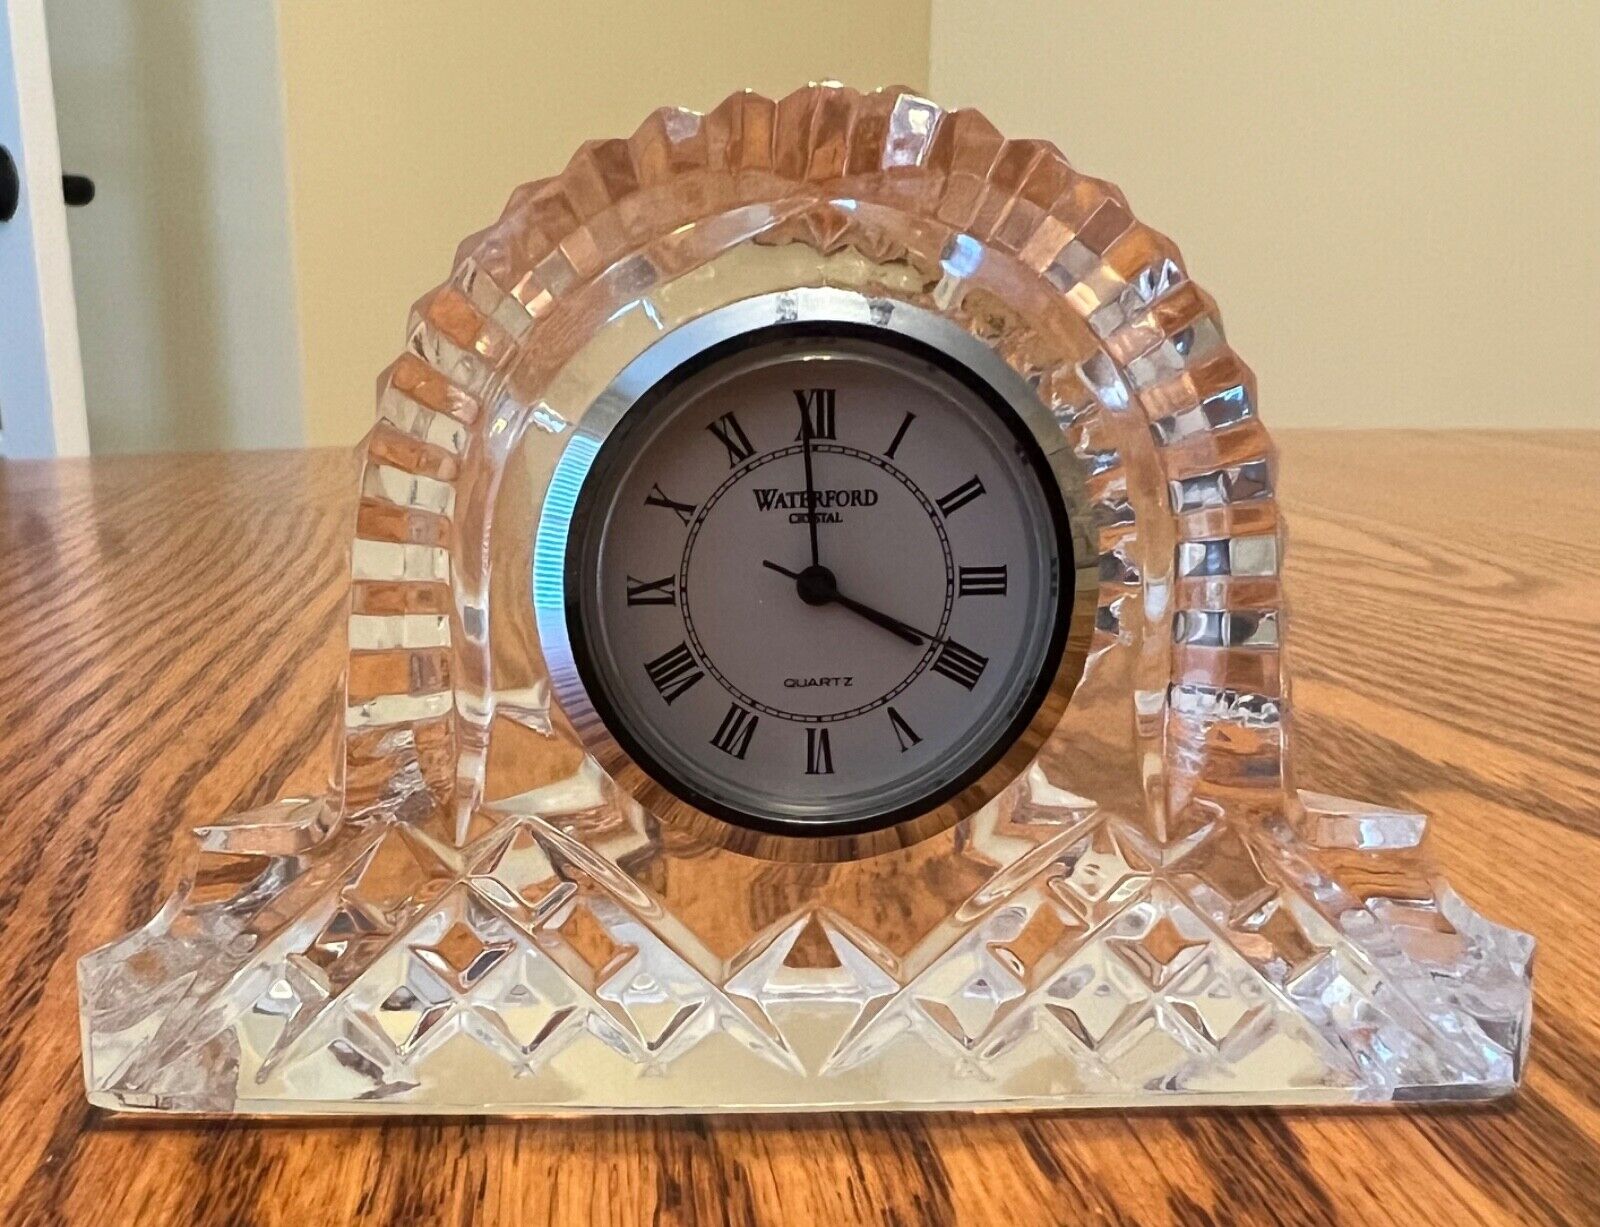 Waterford Crystal Small Mantle Style Clock from Ireland in Original Box